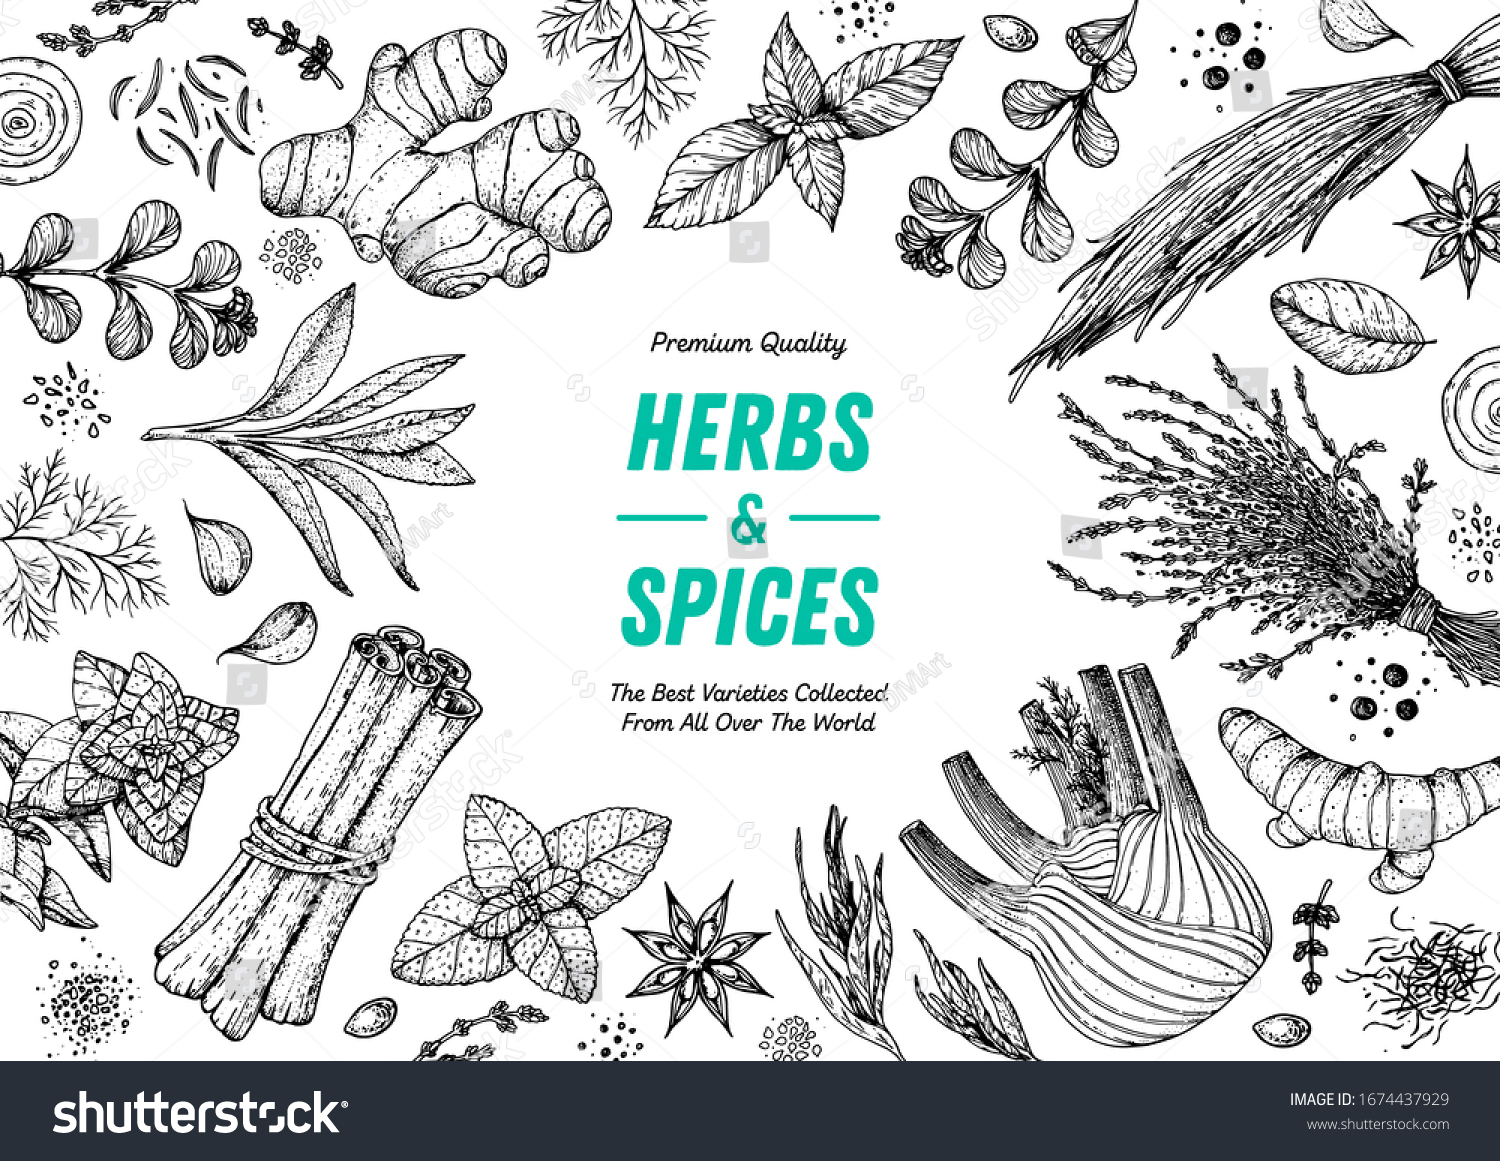 Herbs and spices hand drawn vector illustration. Aromatic plants. Hand drawn food sketch. Vintage illustration. Card design. Sketch style. Spice and herbs black and white design. #1674437929